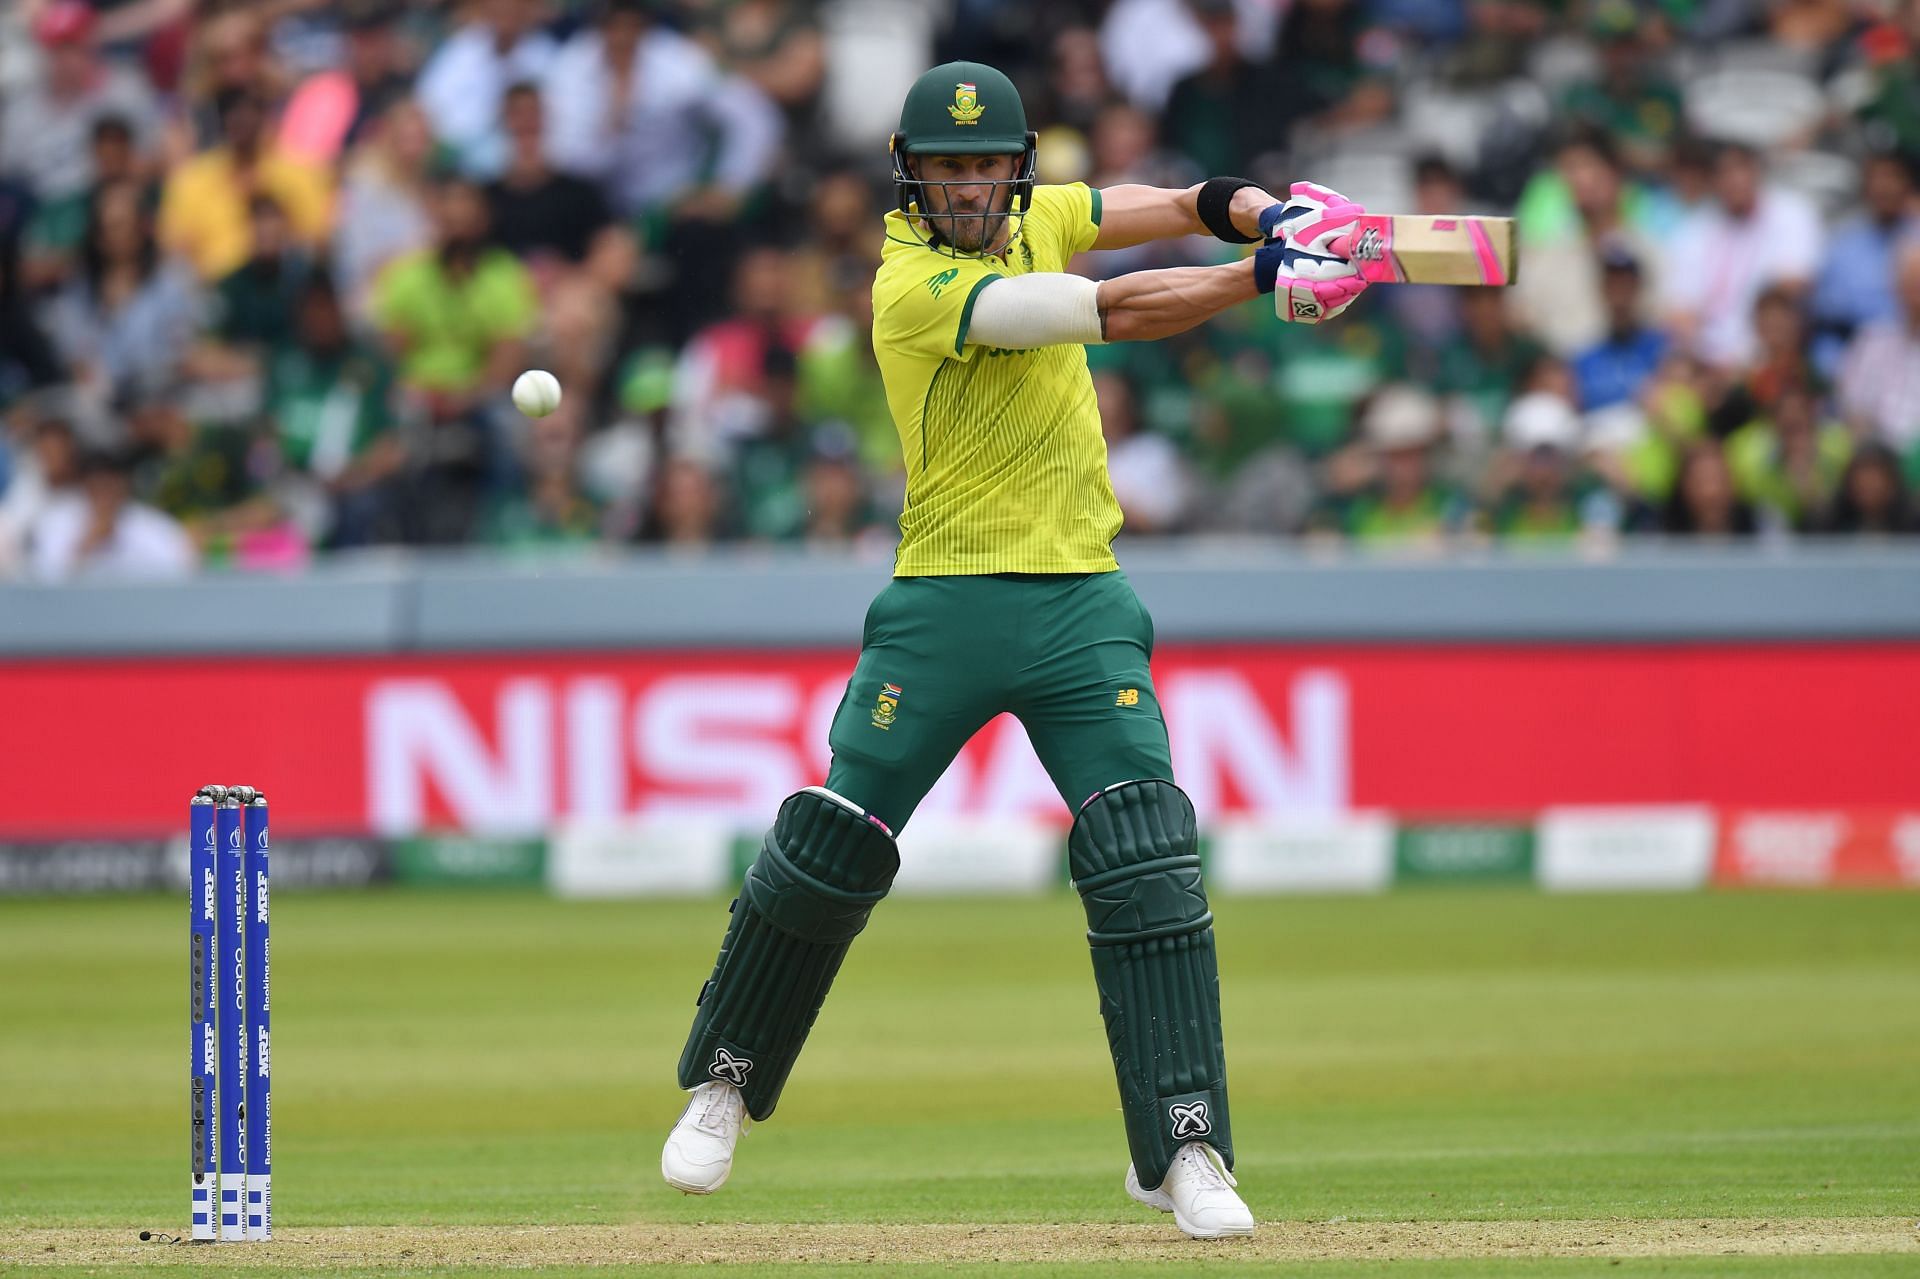 Pakistan v South Africa - ICC Cricket World Cup 2019